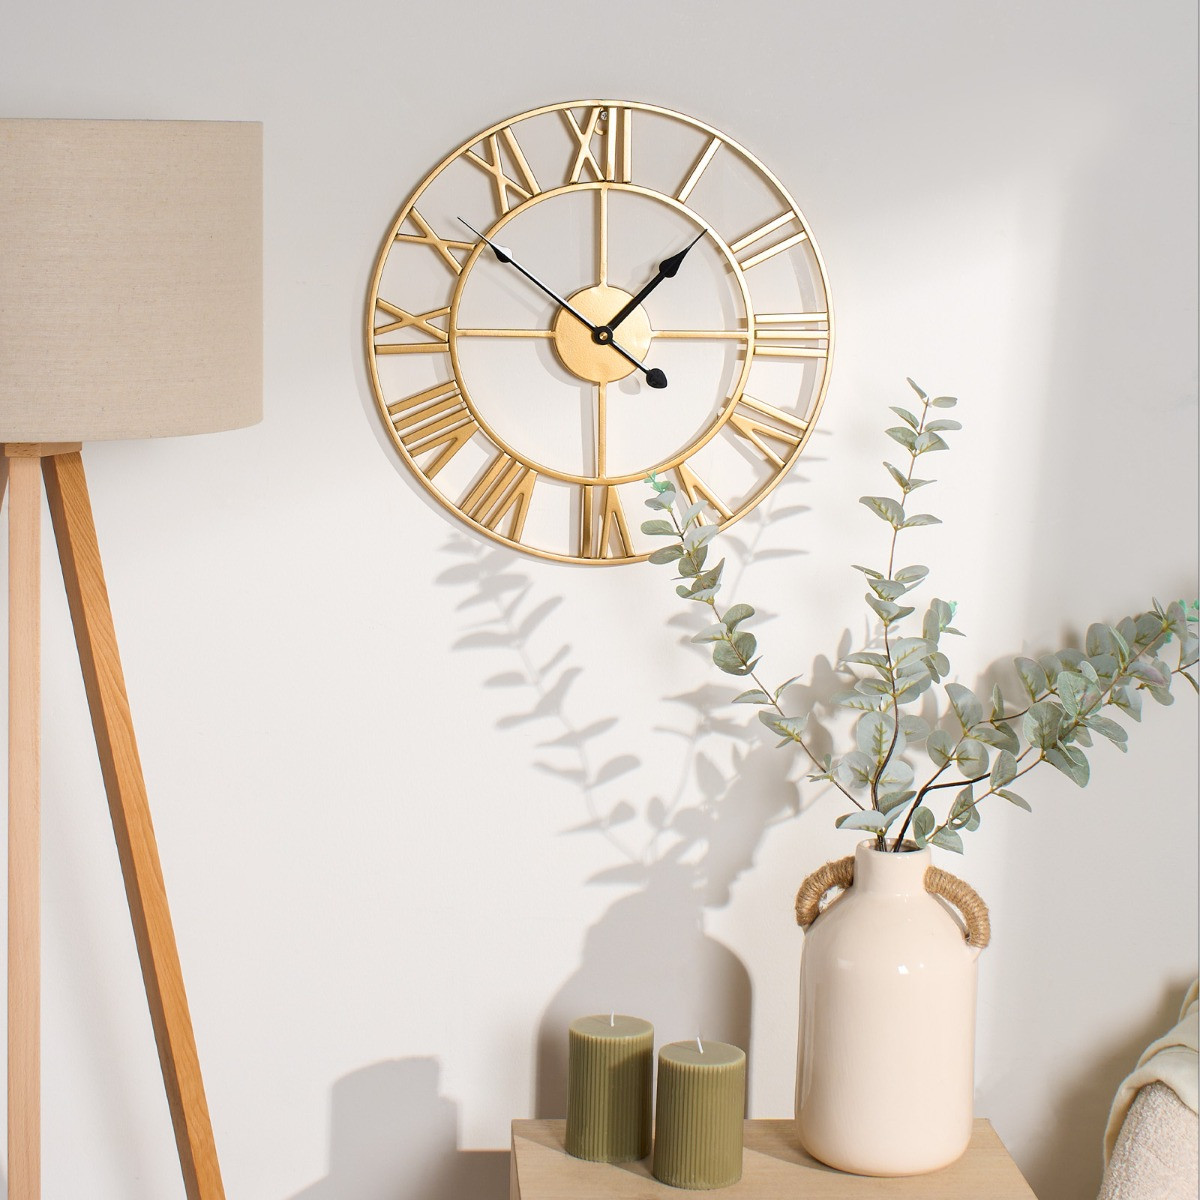 OHS Skeleton Wall Clock - Gold>